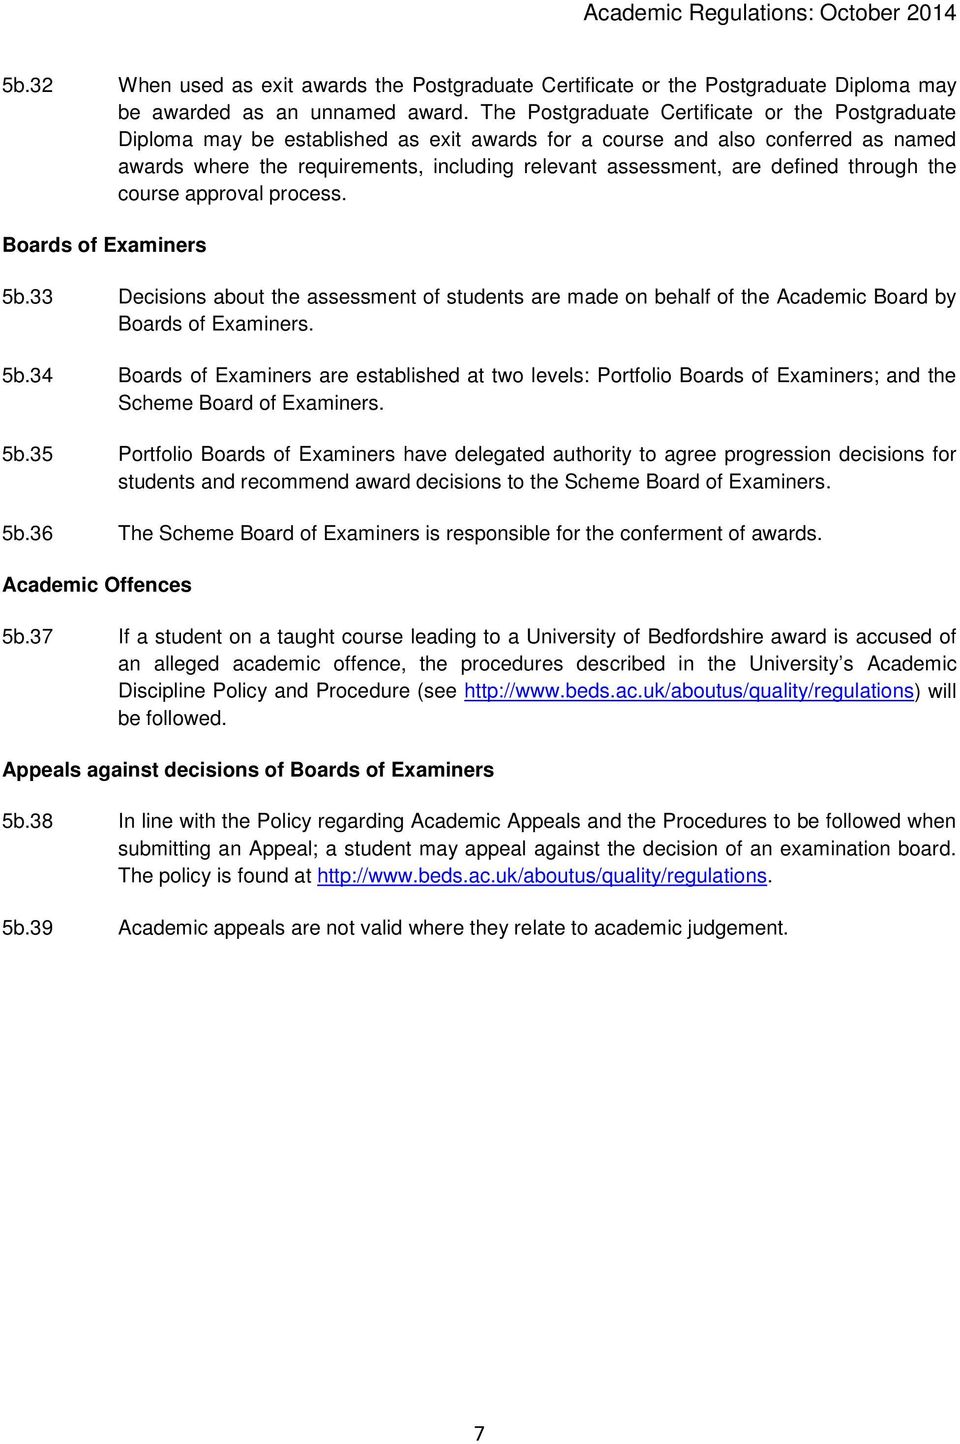 defined through the course approval process. Boards of Examiners 5b.33 Decisions about the assessment of students are made on behalf of the Academic Board by Boards of Examiners. 5b.34 Boards of Examiners are established at two levels: Portfolio Boards of Examiners; and the Scheme Board of Examiners.